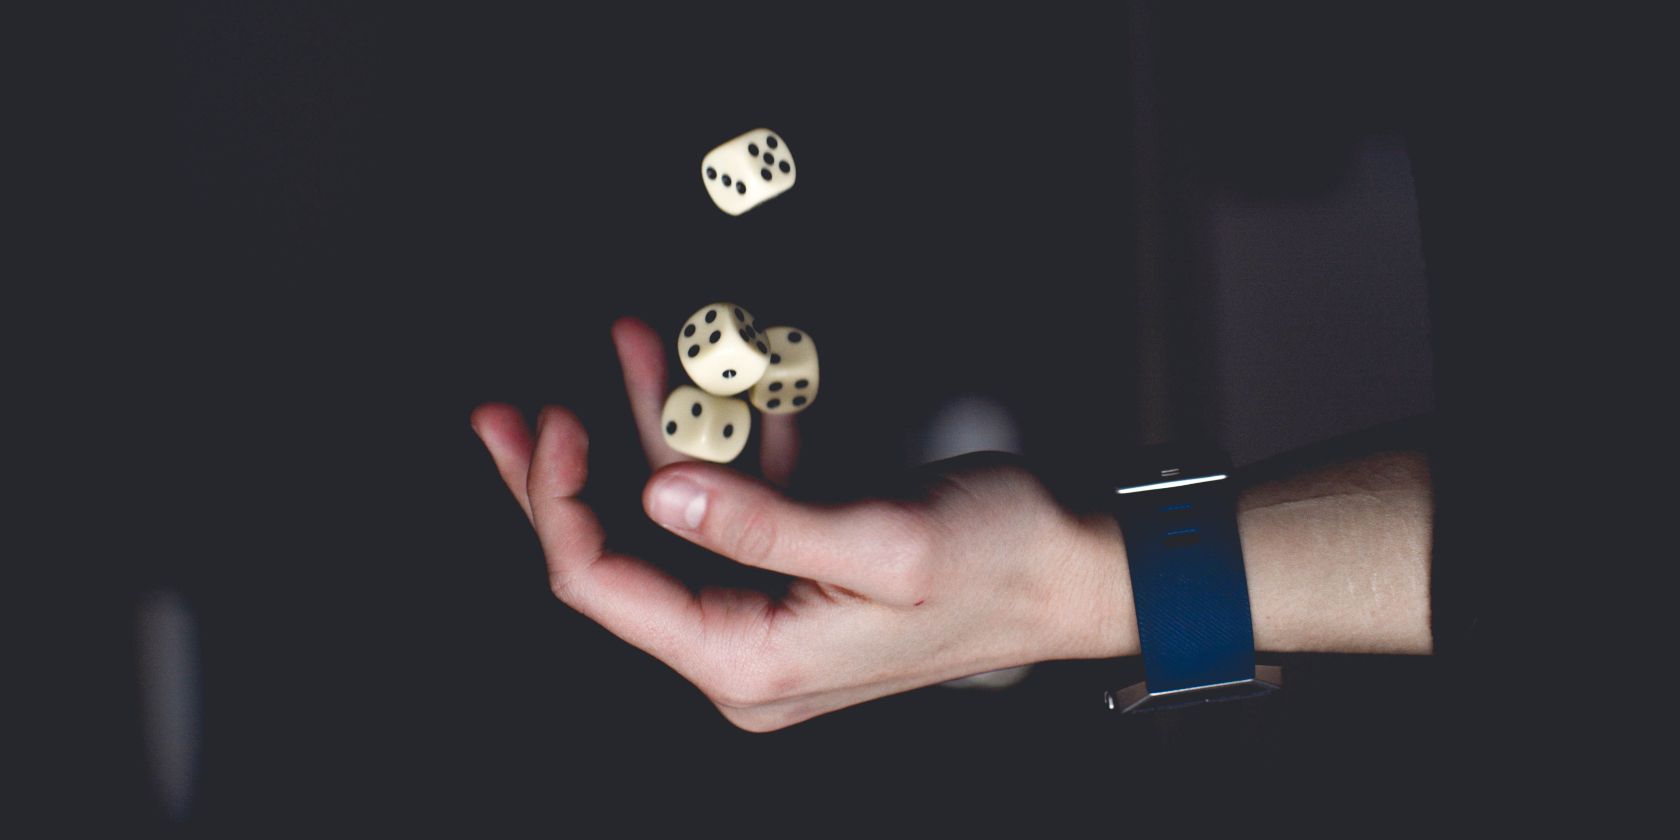 A hand catching four falling dice